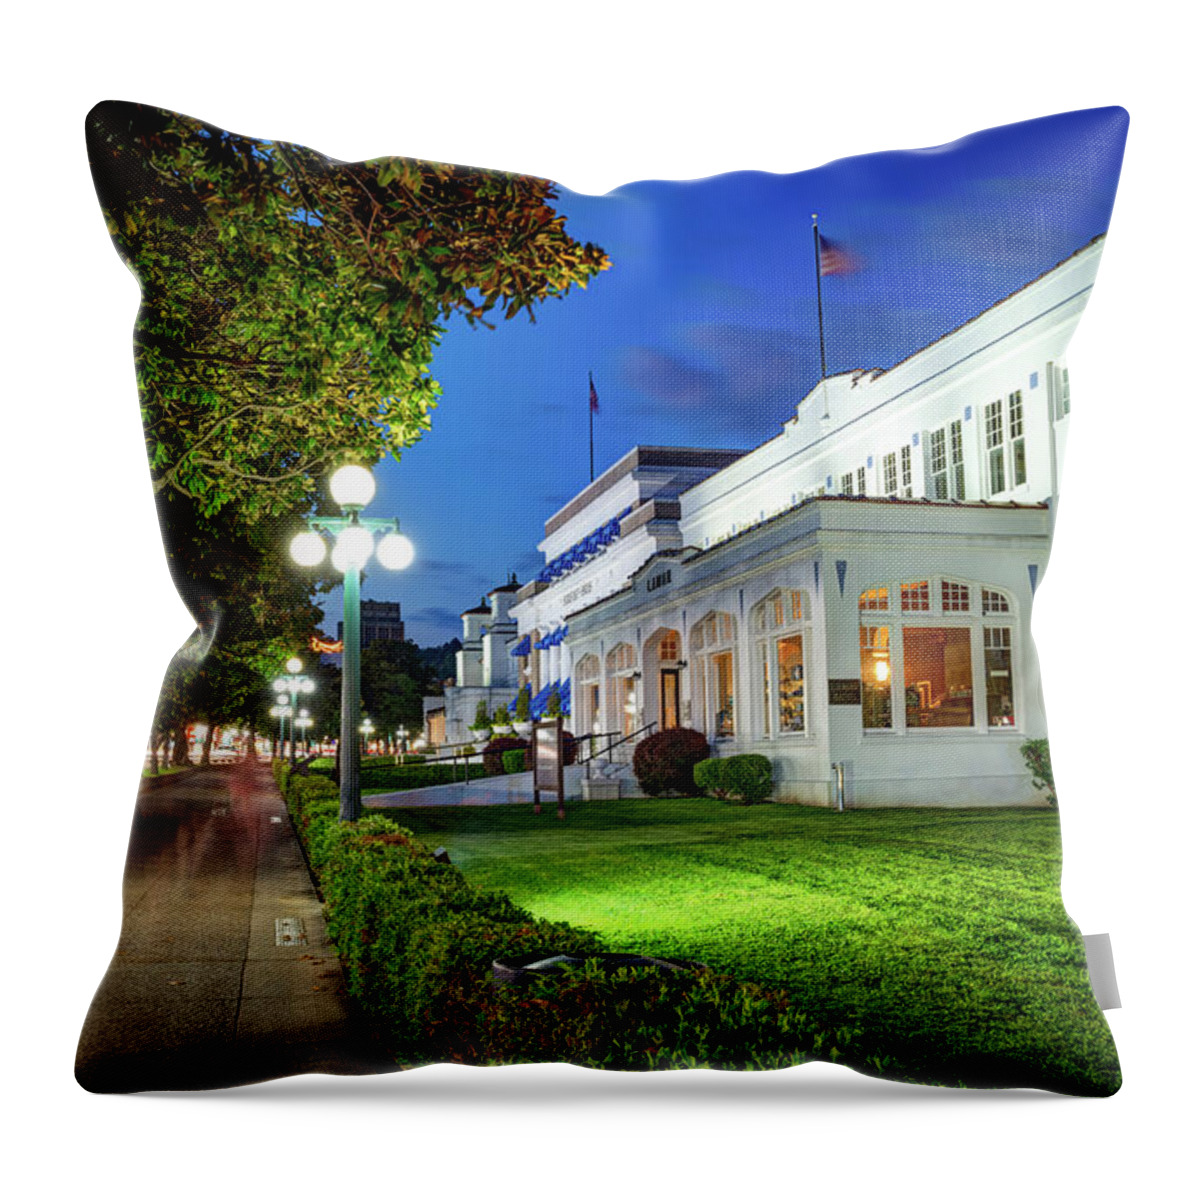 Hot Springs Throw Pillow featuring the photograph Lamar Bathhouse and Hot Springs Bathhouse Row at Dusk by Gregory Ballos